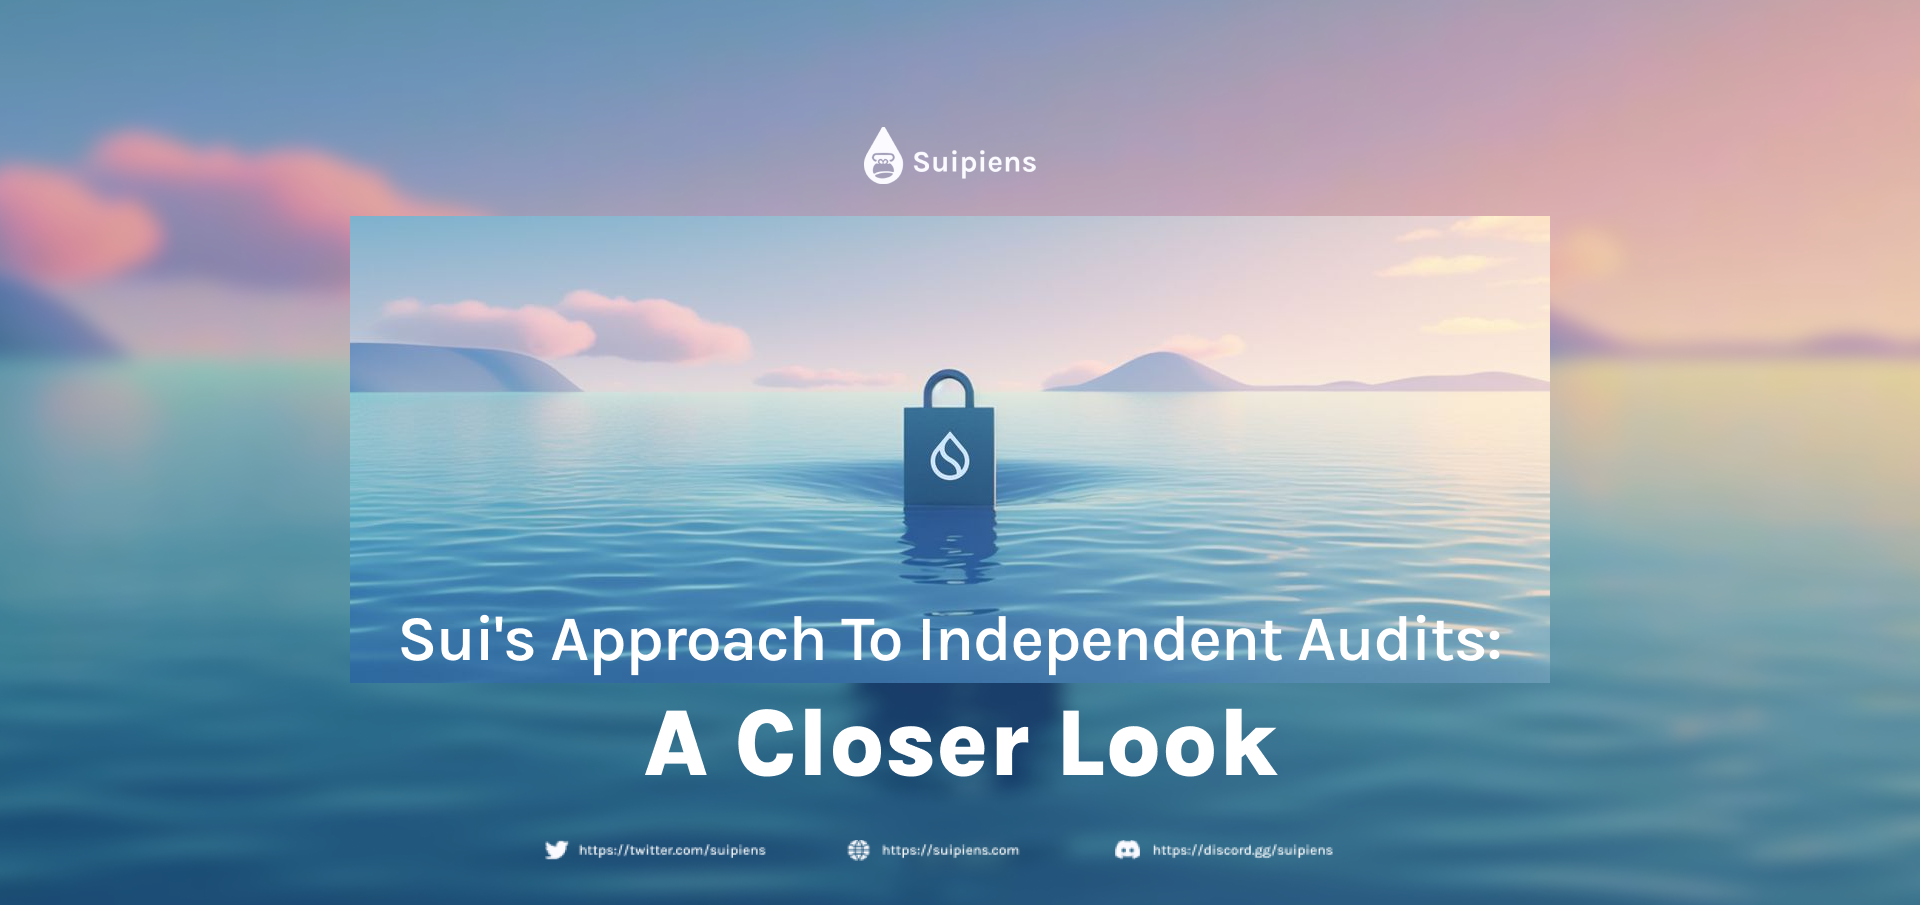 Sui's Approach to Independent Audits: A Closer Look